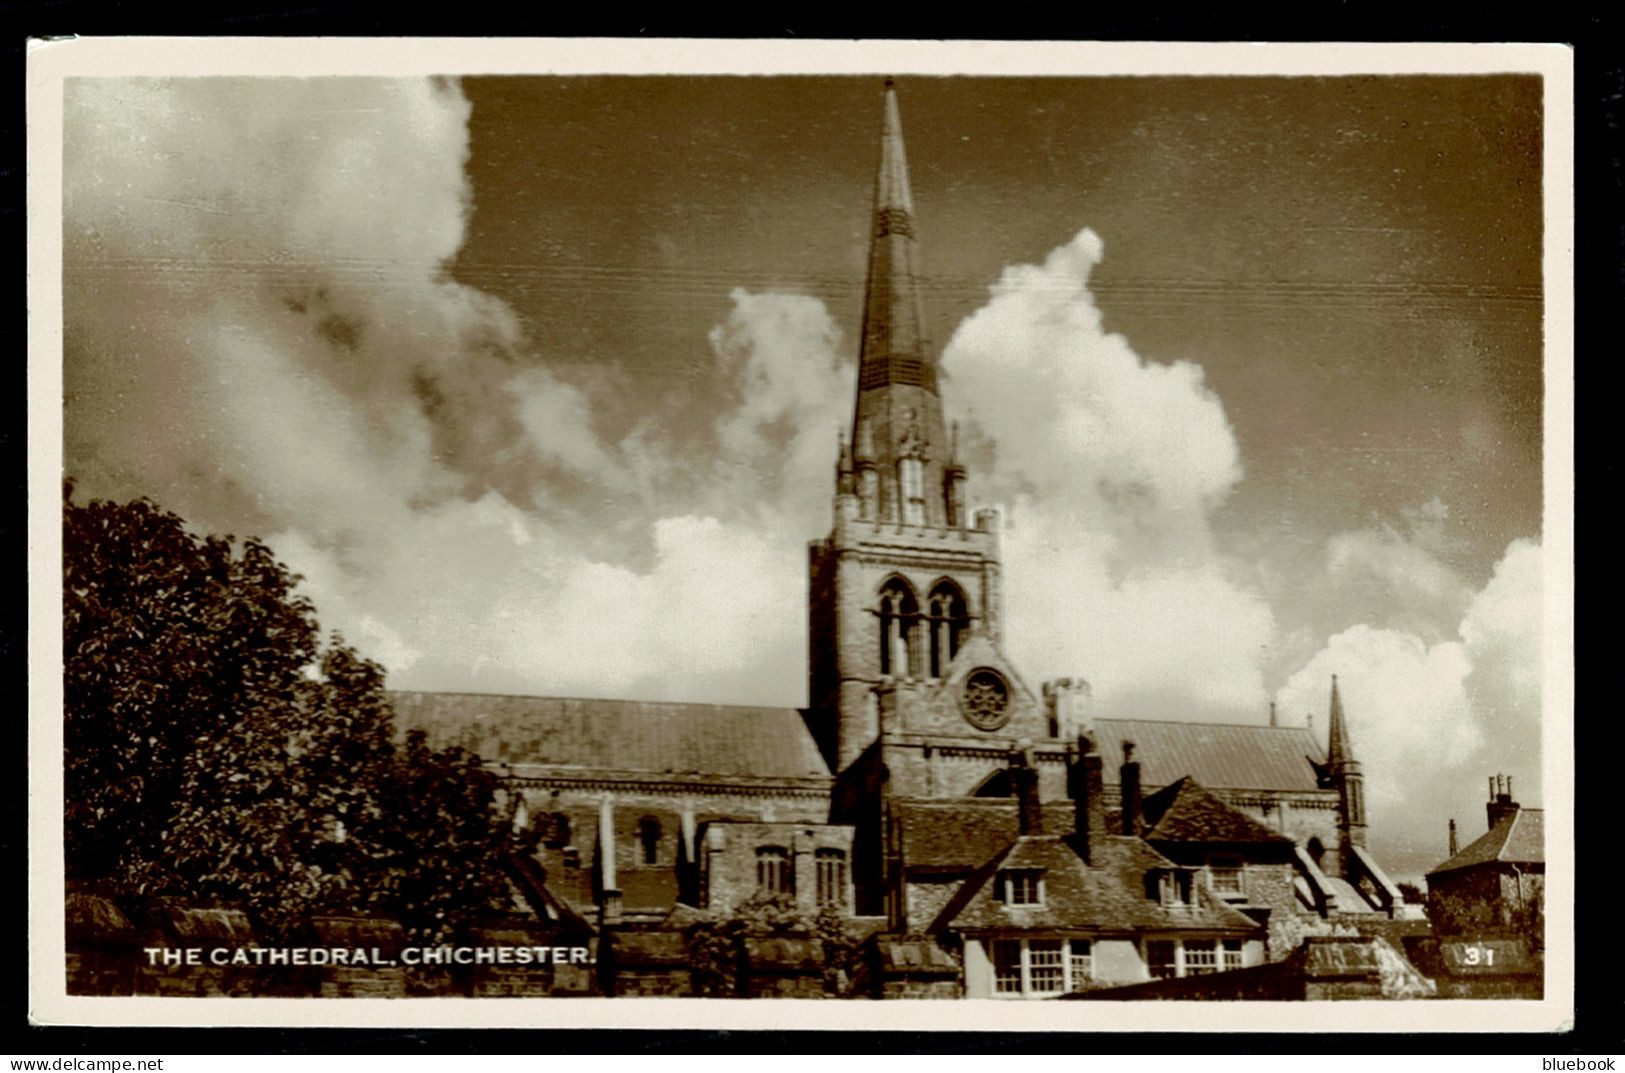 Ref 1626 - Real Photo Postcard - Chichester Cathedral - Sussex - Chichester